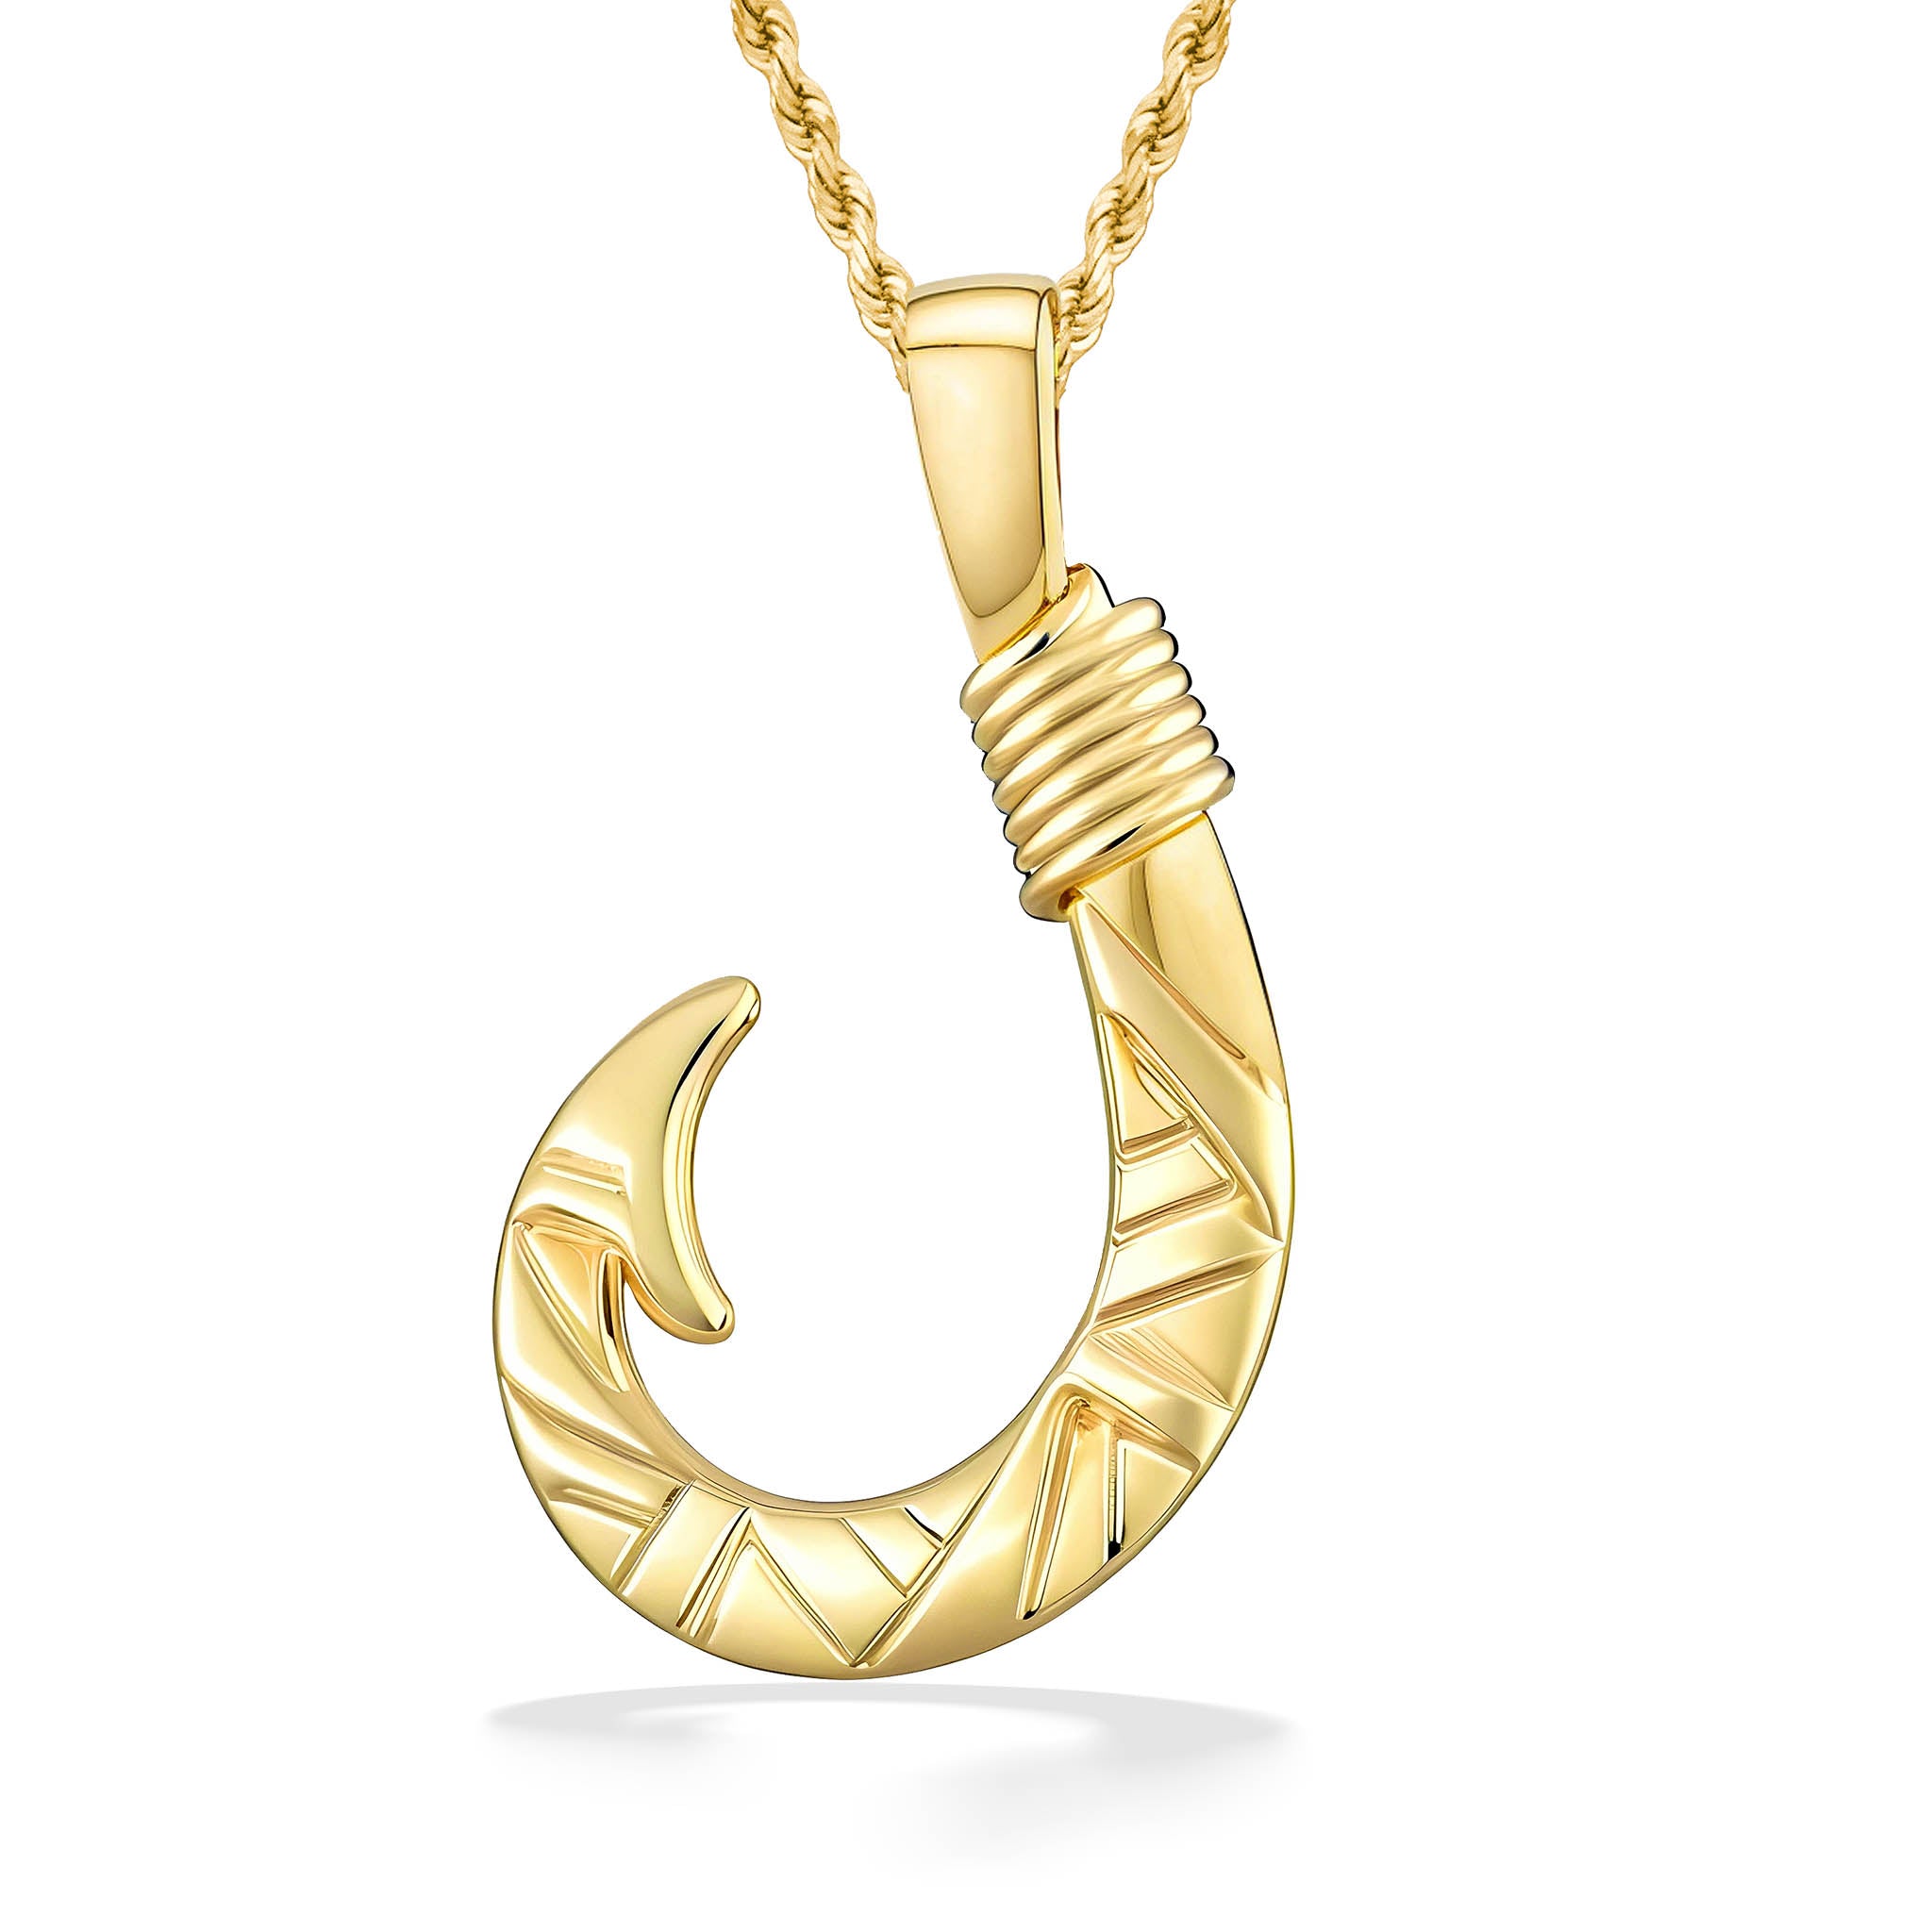 unisex Fish Hook Pendant in Gold - 24mm- Made in Hawaii